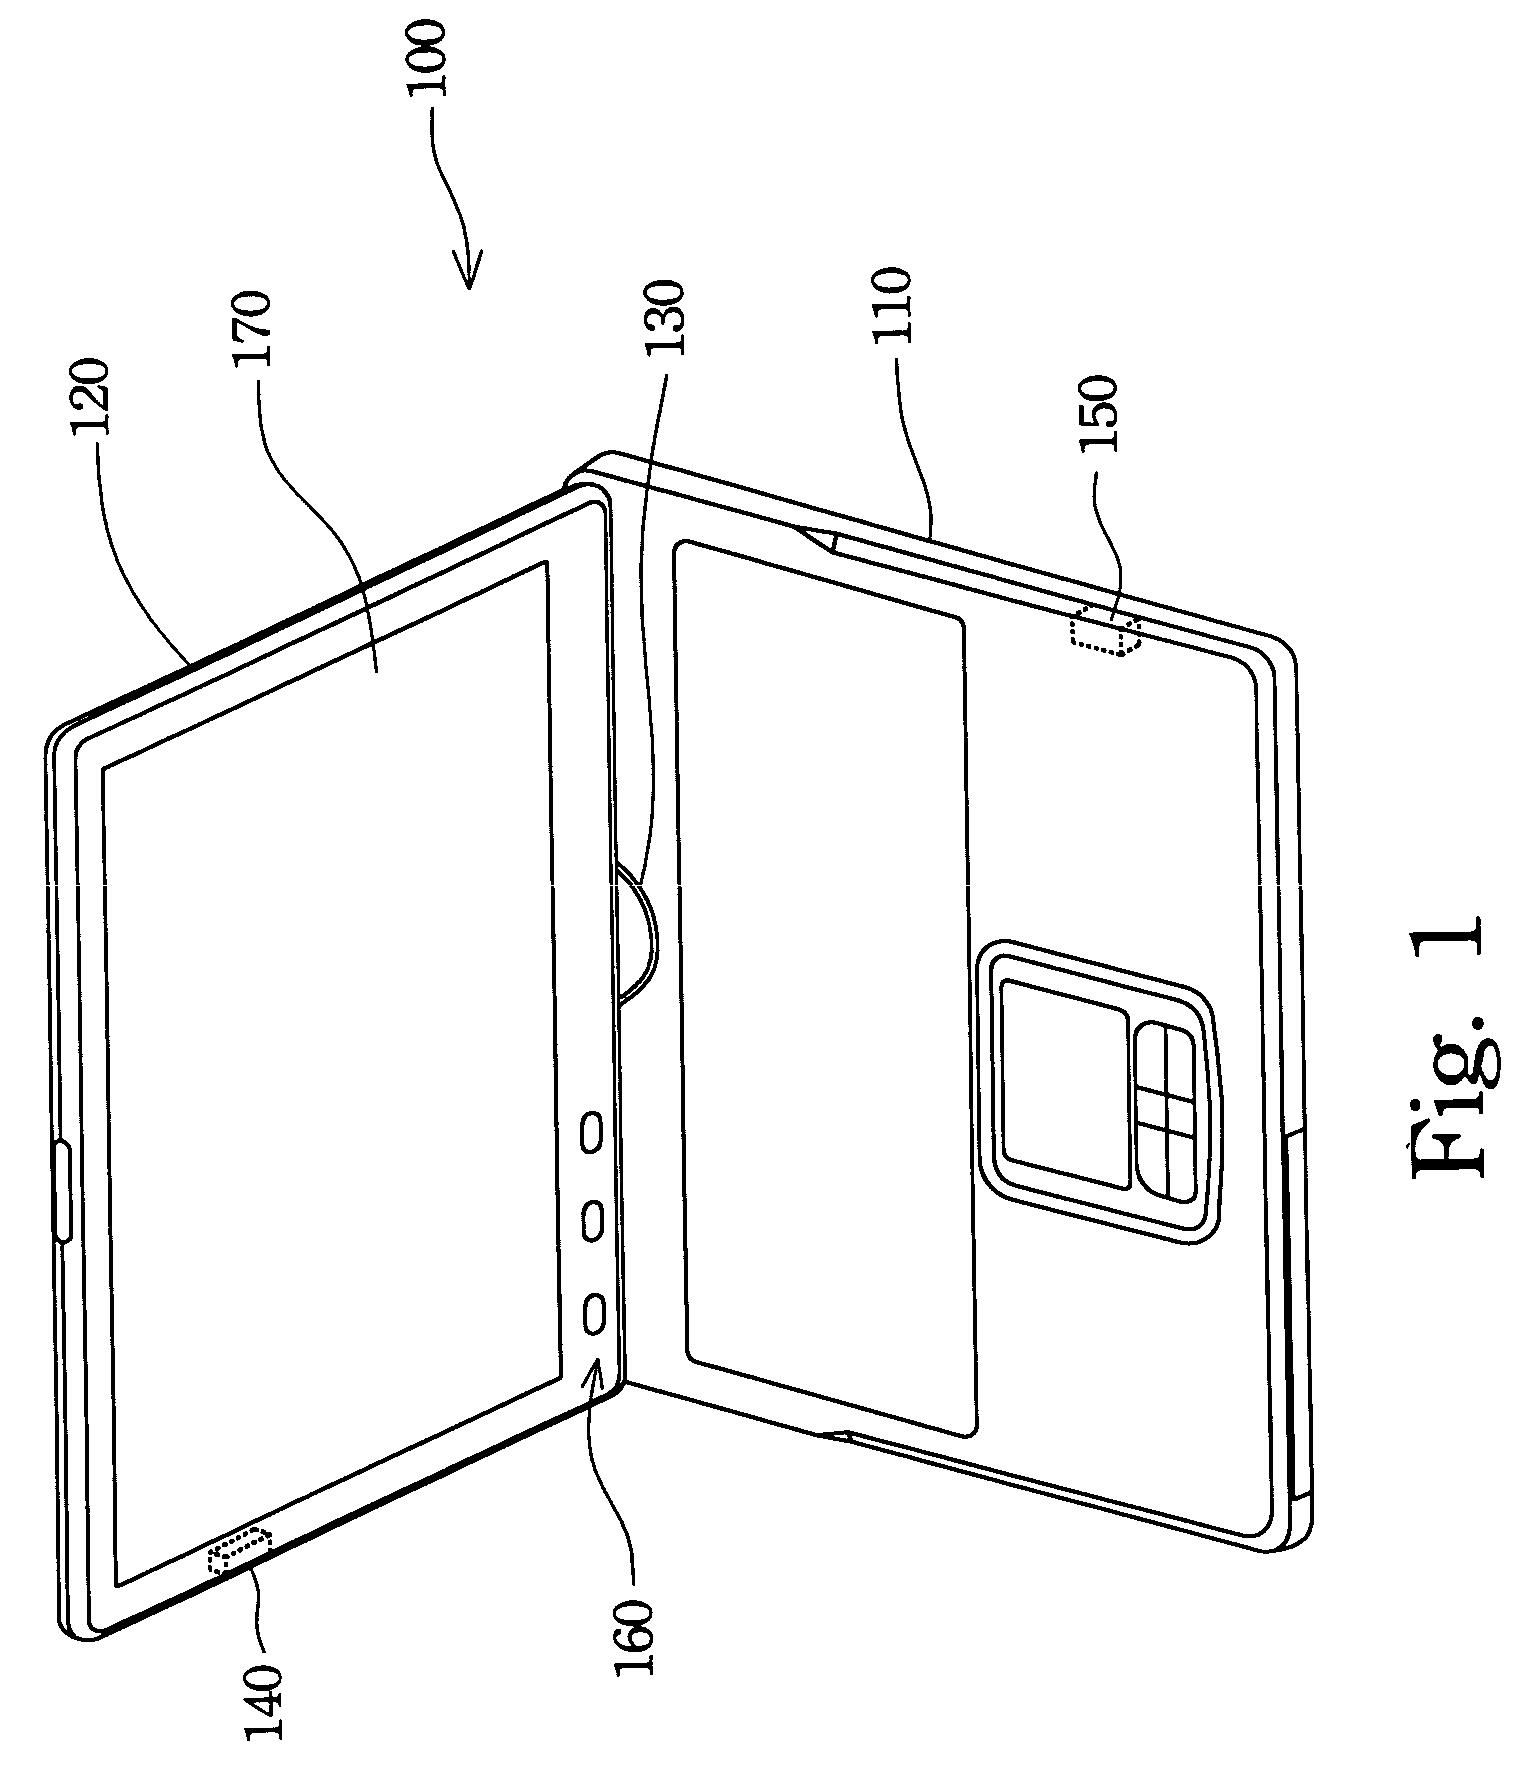 Liquid crystal display with optical disk drive control functions